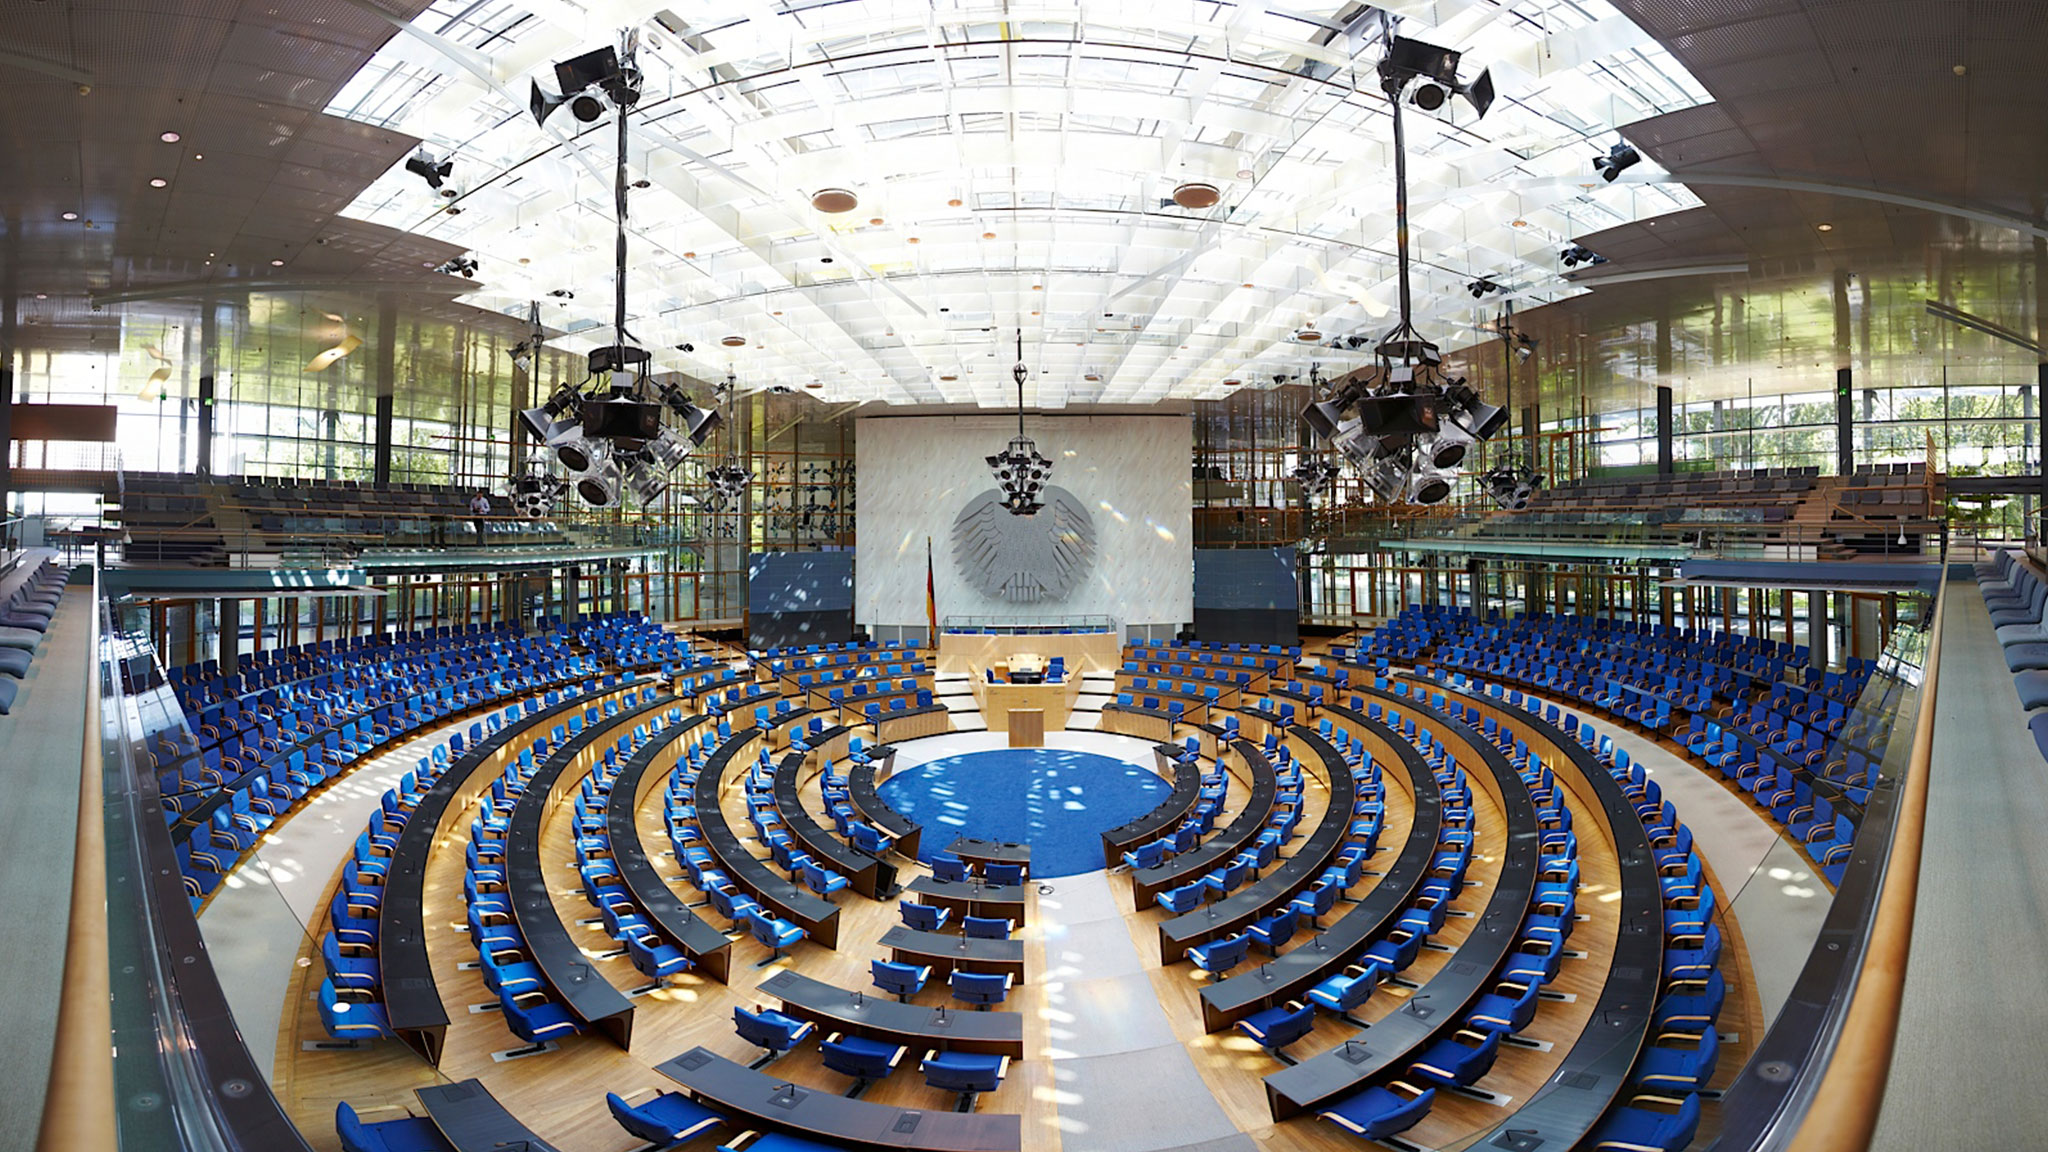 Plenary hall with designed seating solutions from Trendelkamp.